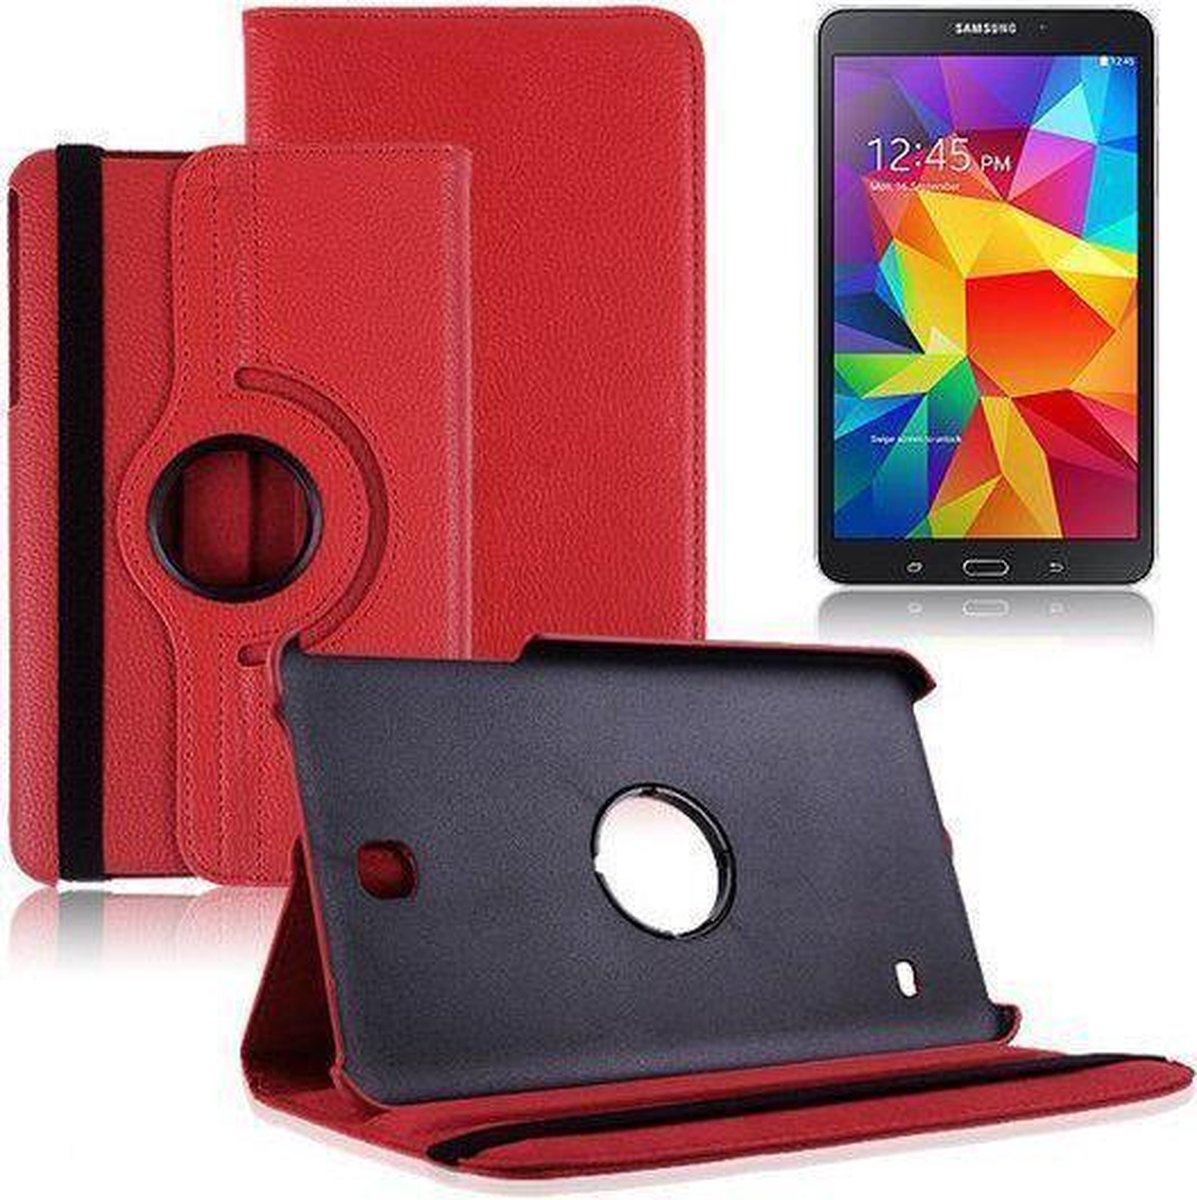 Samsung Galaxy Tab 4 8.0 Inch Hoes Cover 360 graden draaibare Case Rood